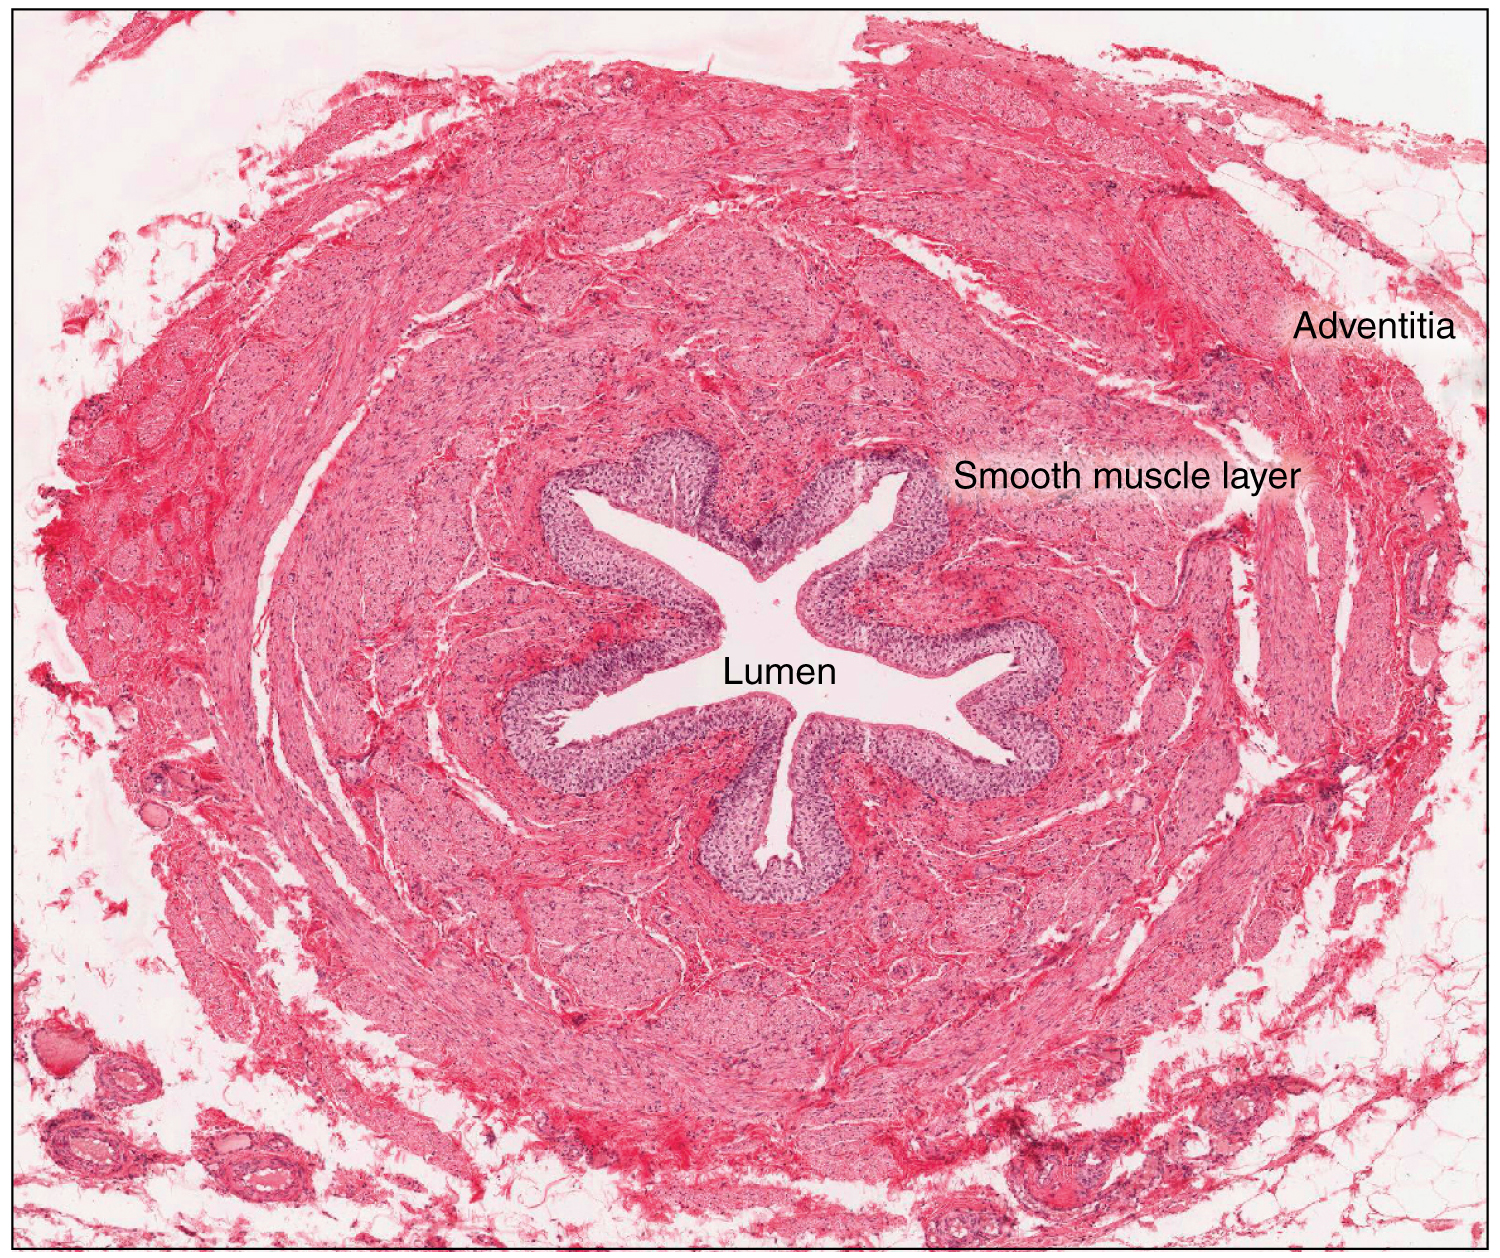 A micrograph shows the lumen of the ureter.